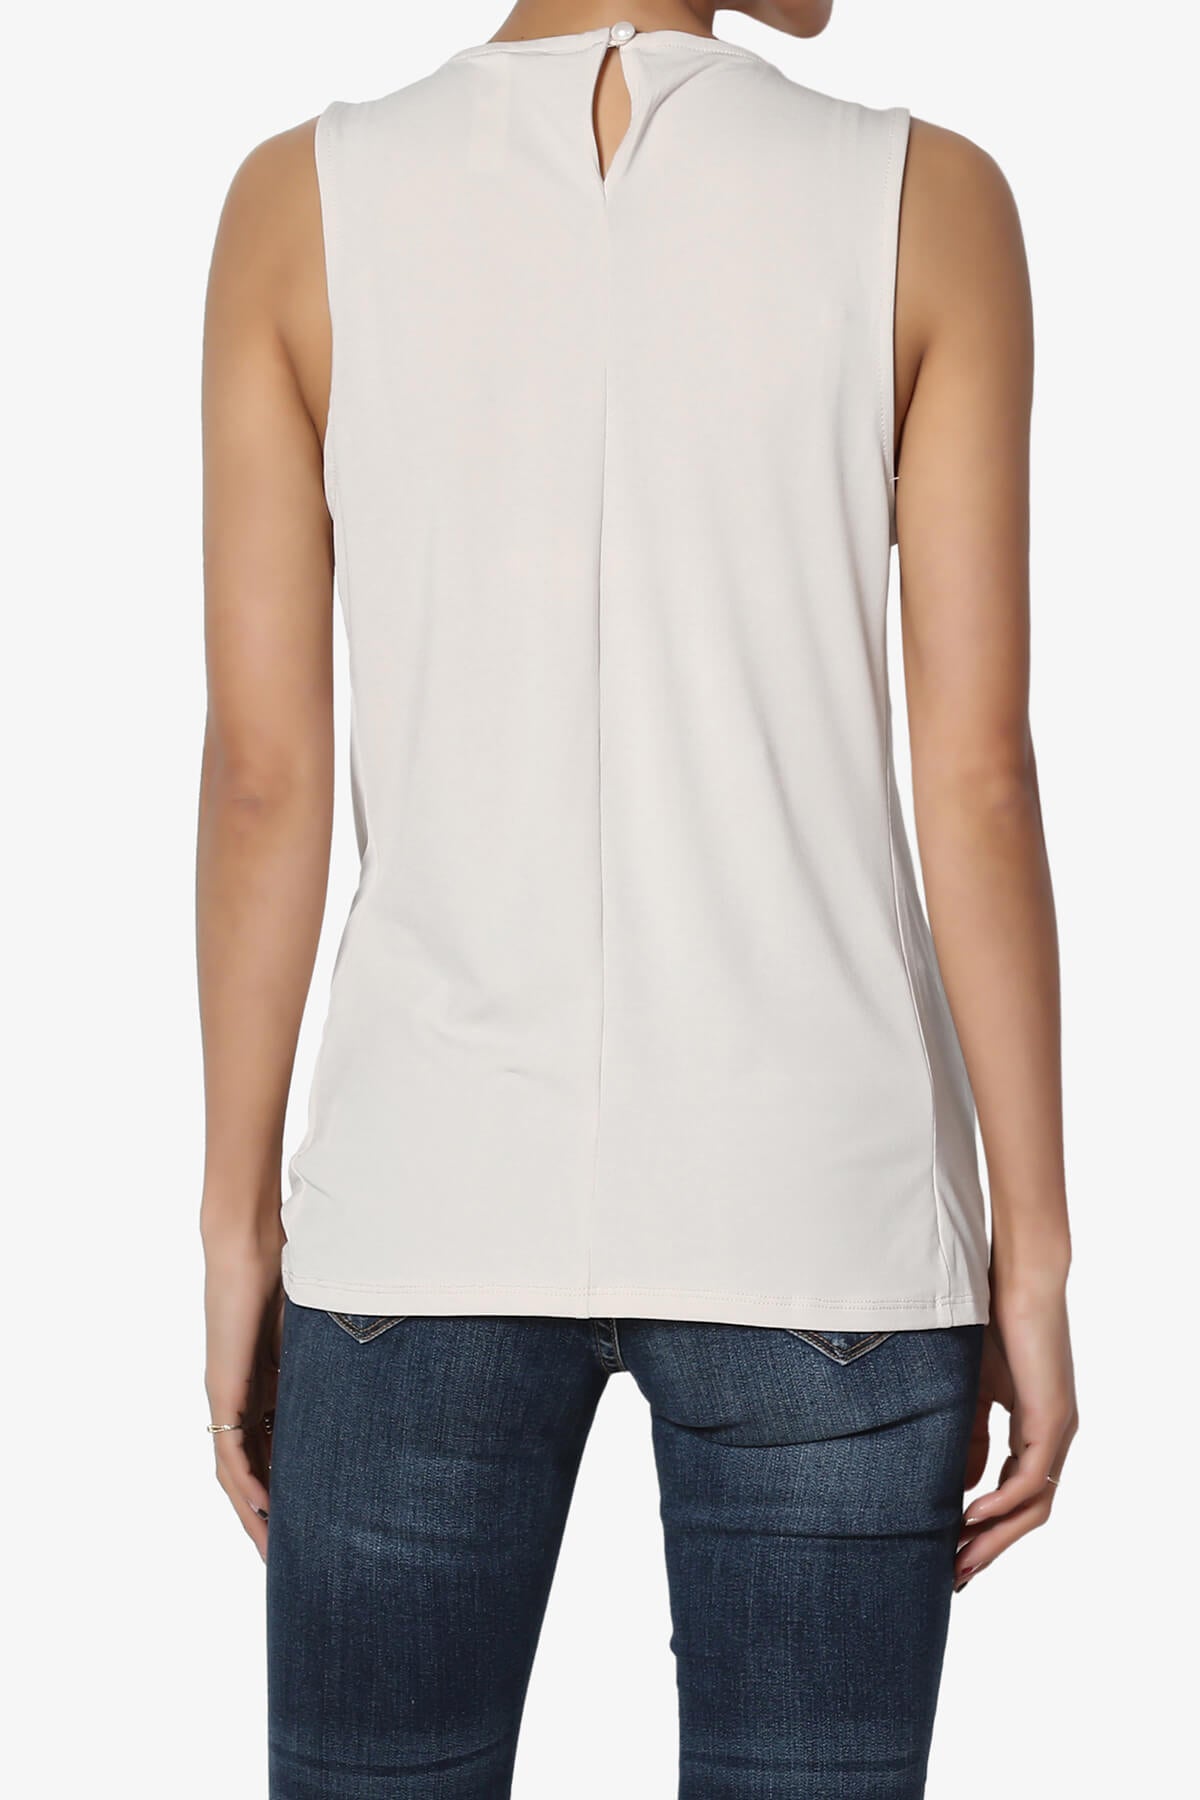 Load image into Gallery viewer, Chaffee Pleat Neck Tank Top BONE_2
